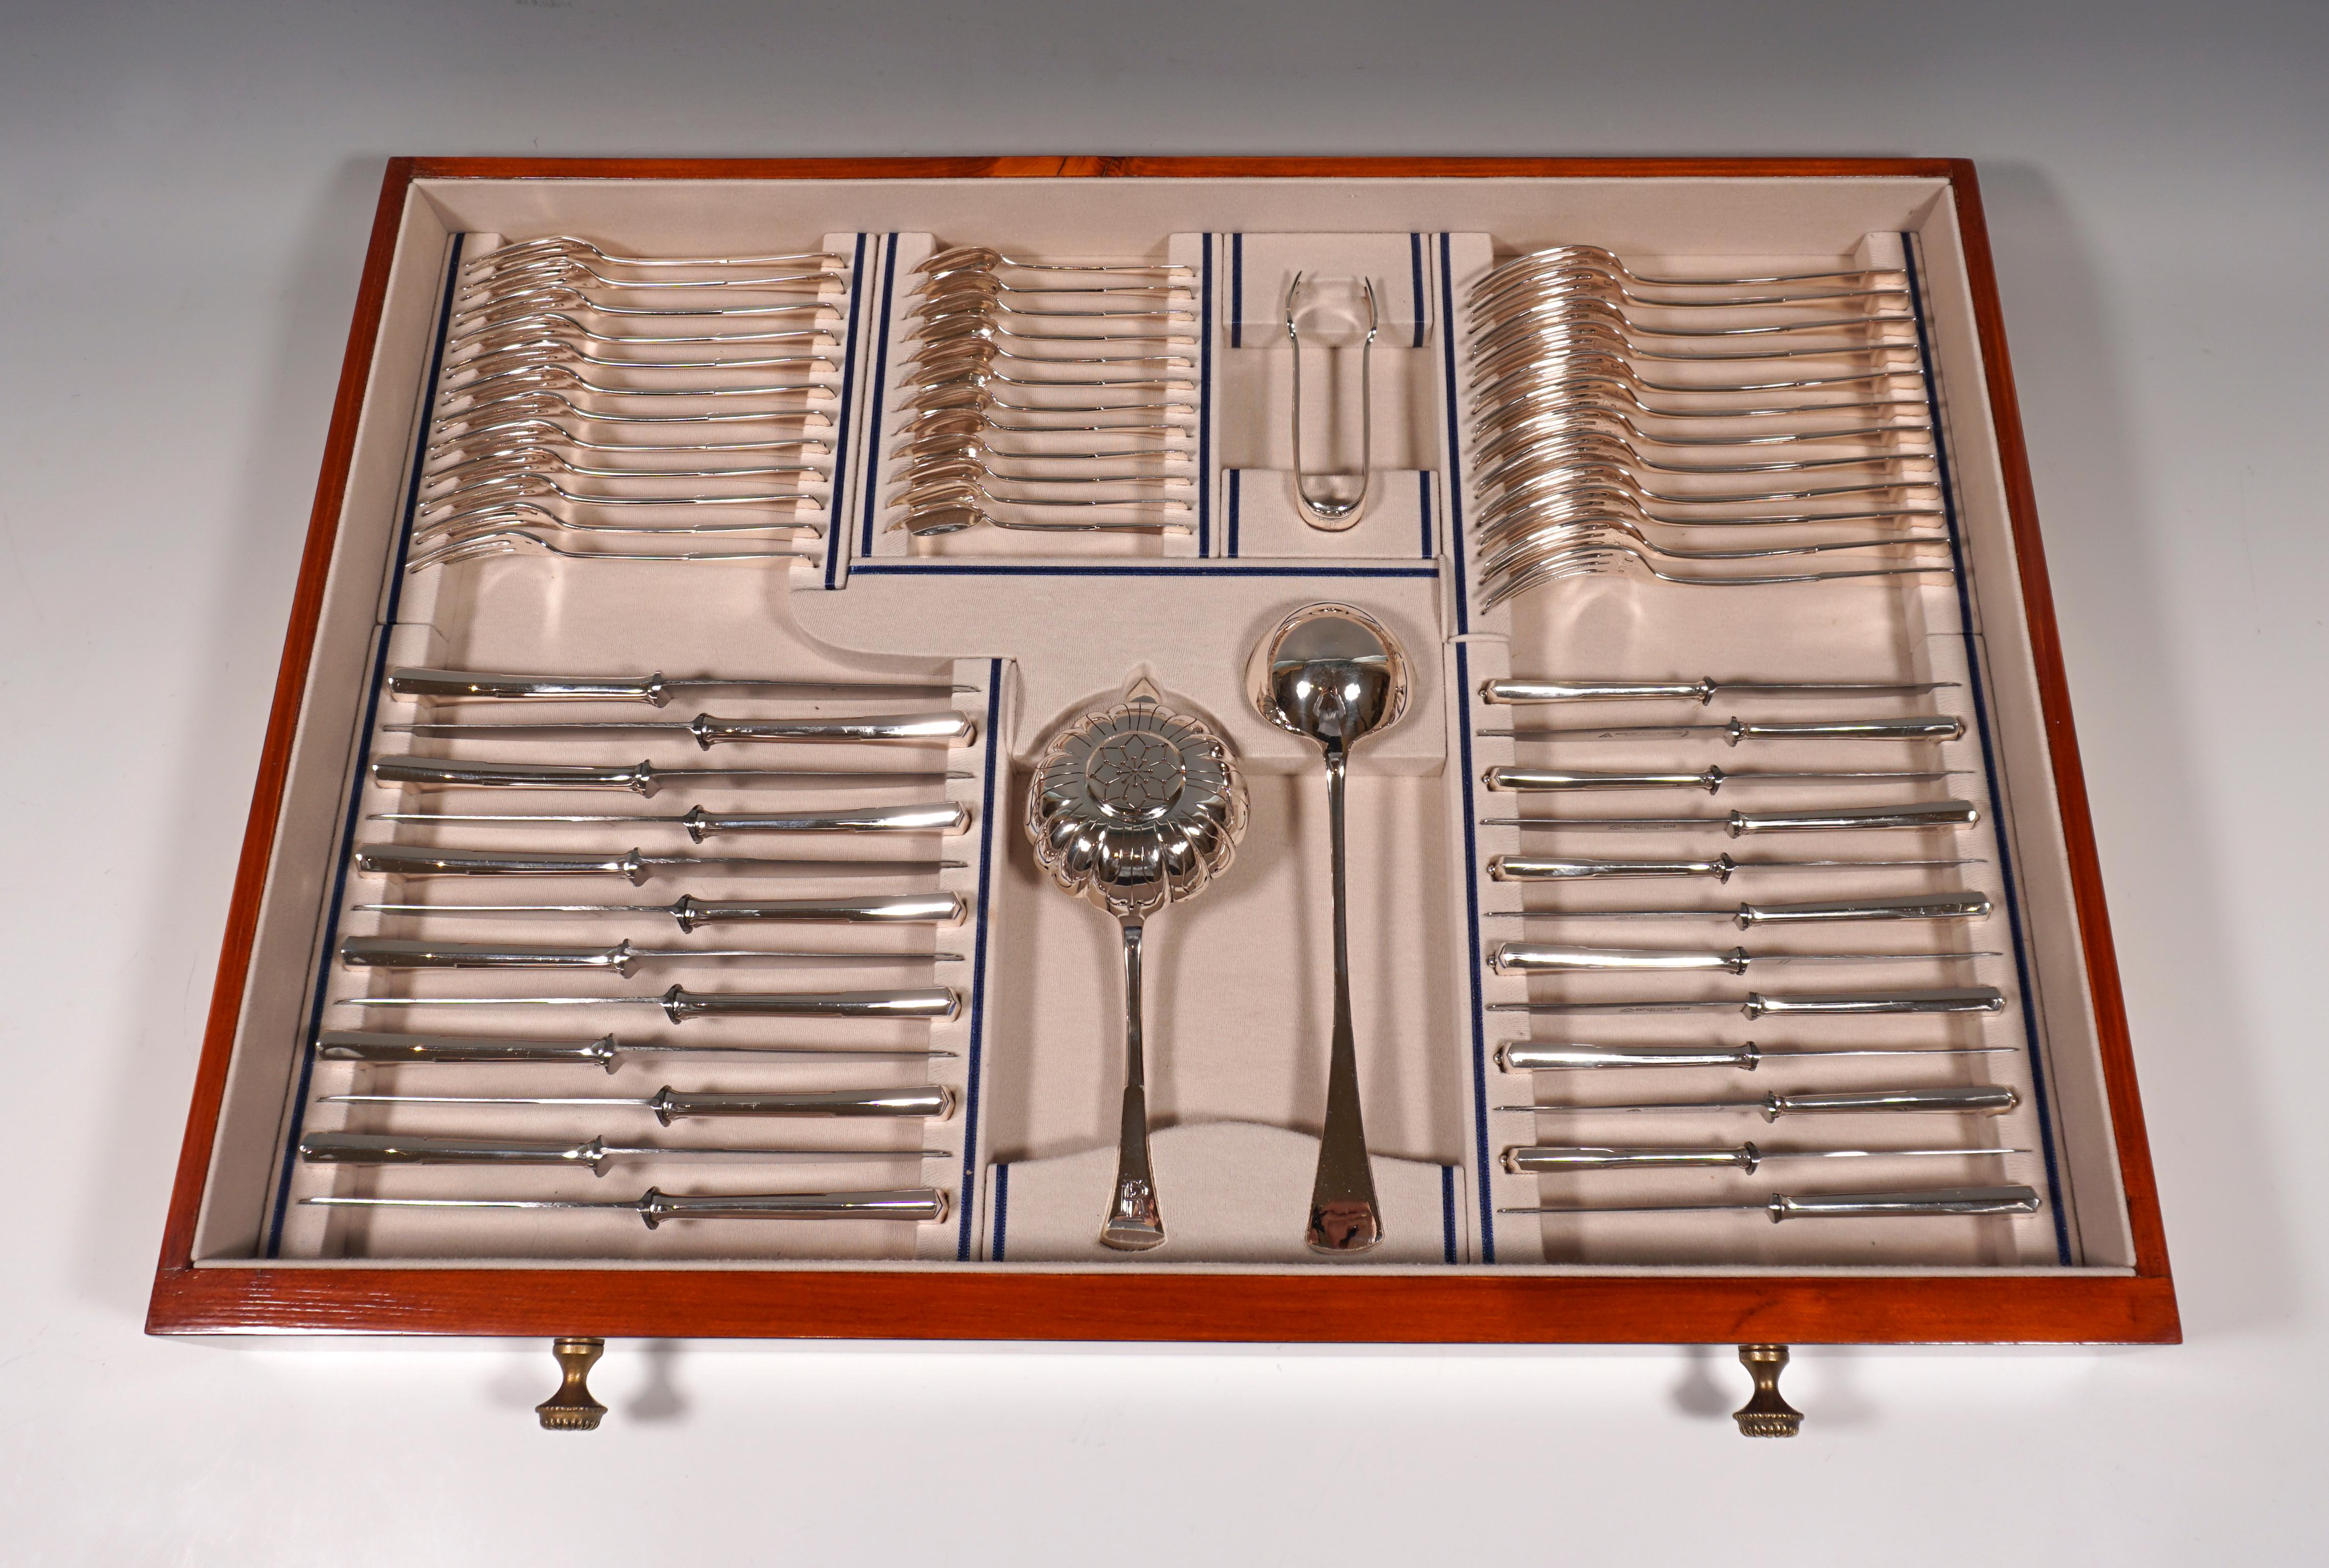 Elegant cutlery set made of solid silver for twelve people, consisting of 122 parts, in wooden showcase.
 
Date of manufactory: circa 1920
Material: Massive silver '800'

Form type: Elegant, simple design with slim bars, expanding like a fan at the